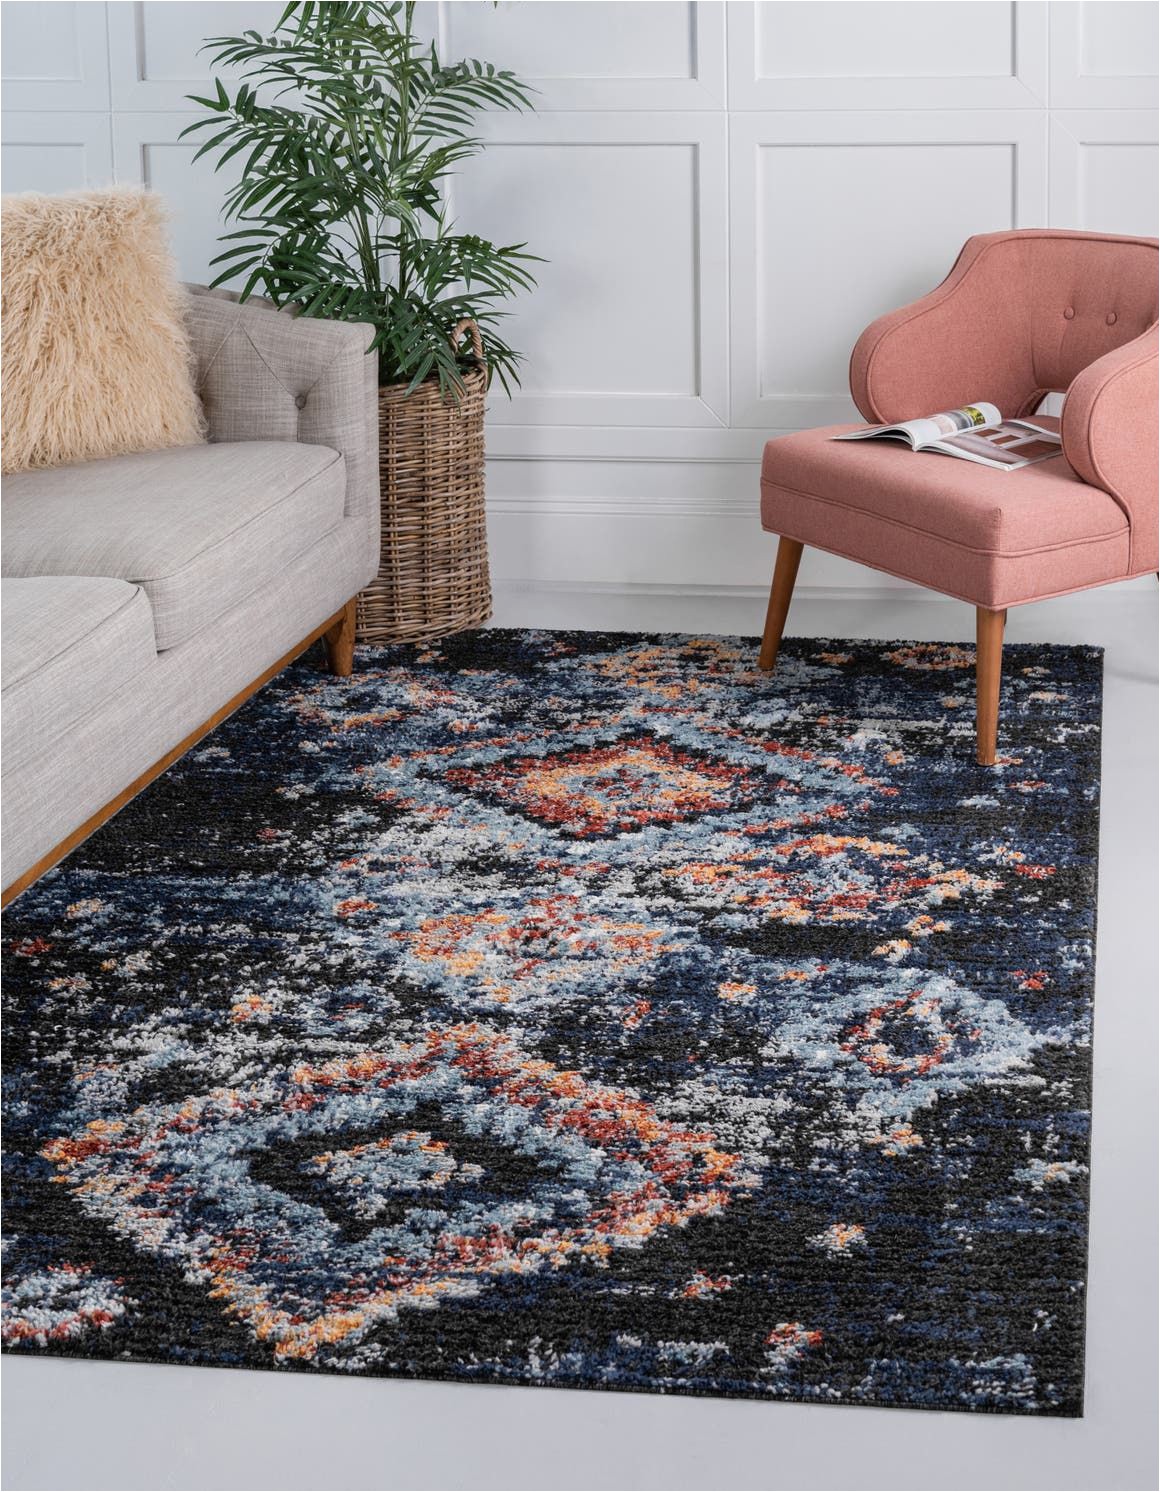 Large Navy Blue Rug Navy Blue 9 X 12 Morocco Rug Rugs